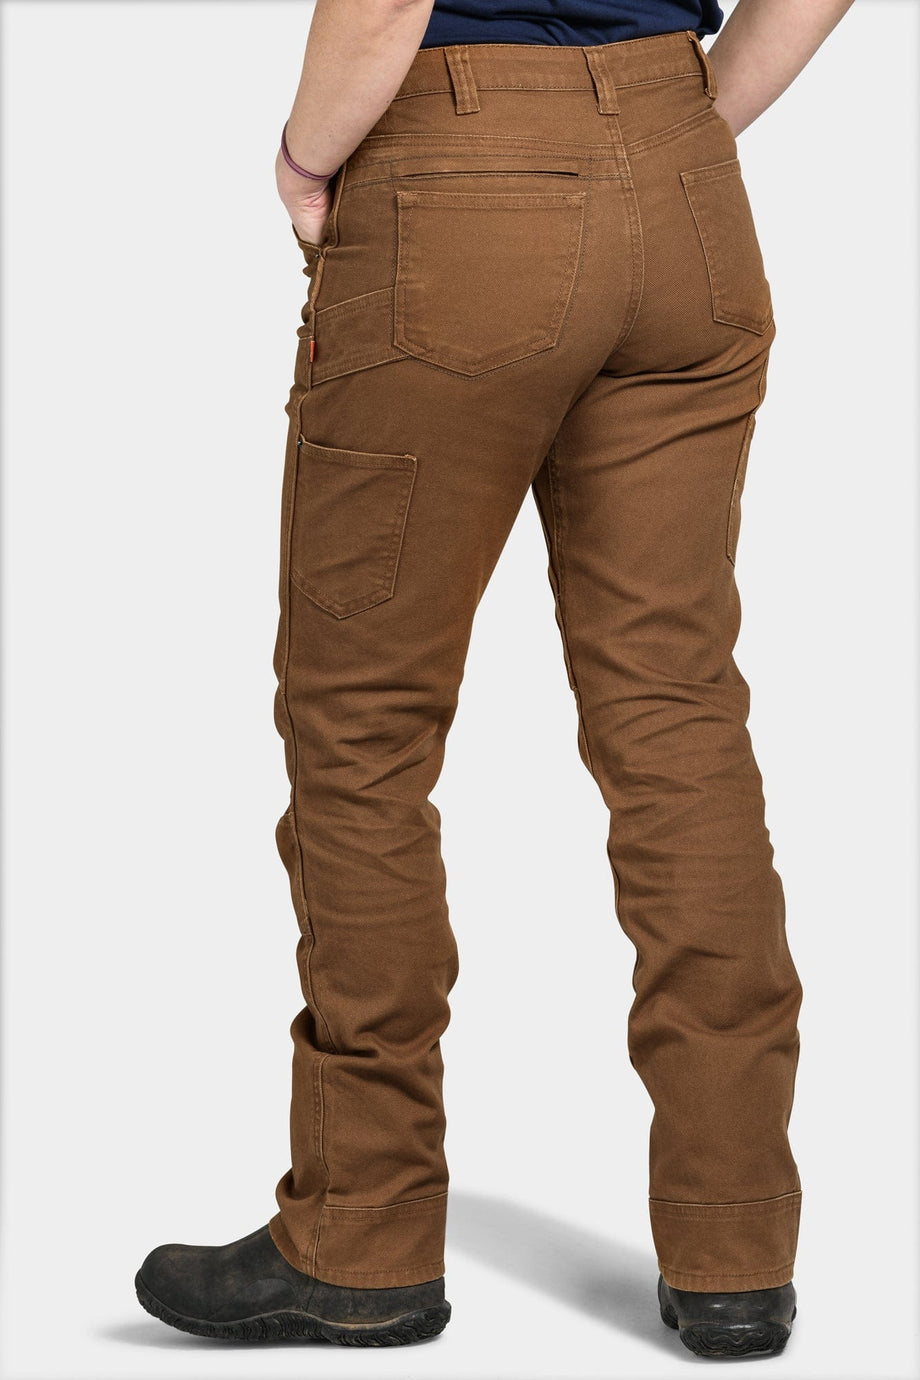 BDG Bleached Authentic Cargo Trousers | Workwear fashion, Cargo trousers,  Clothes